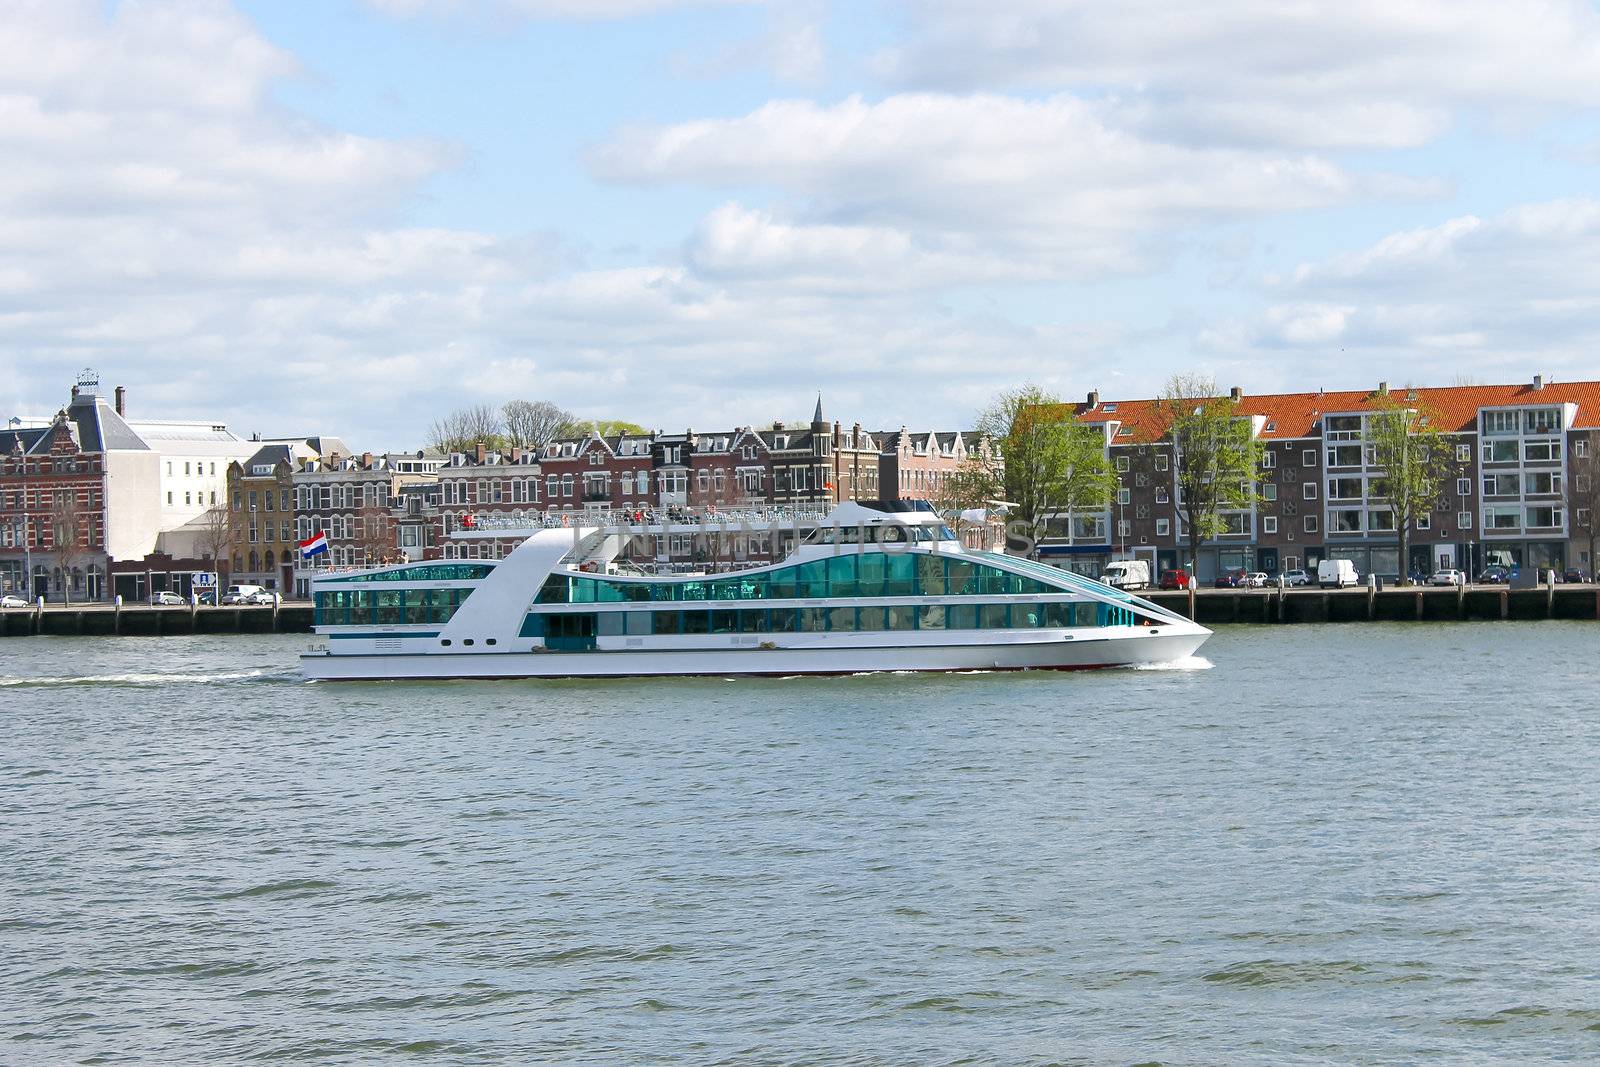 Tourist boat on the river Maas in Rotterdam. Netherlands by NickNick